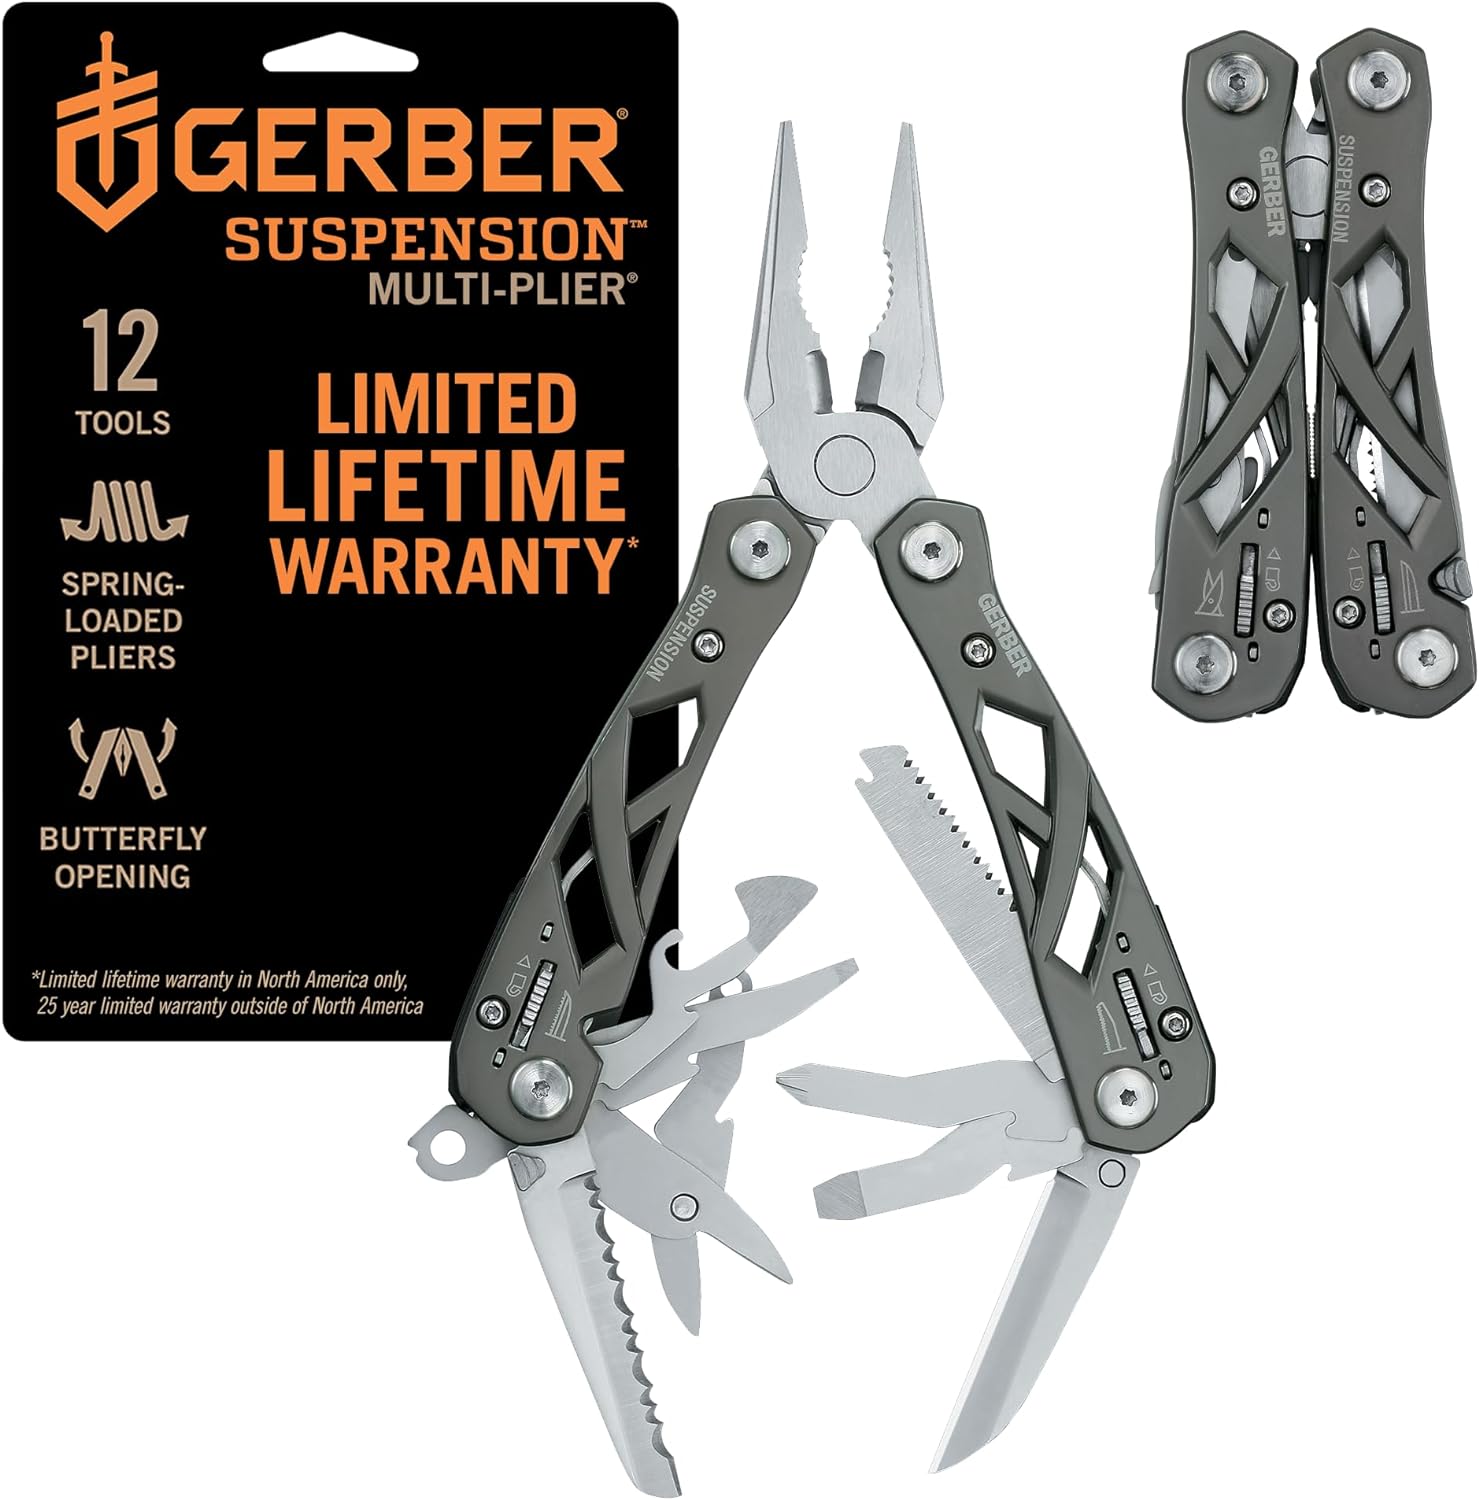 [o美國直購 ] Gerber 01471 Suspension Butterfly Opening Multi-Plier with Sheath 懸浮多功能工具鉗